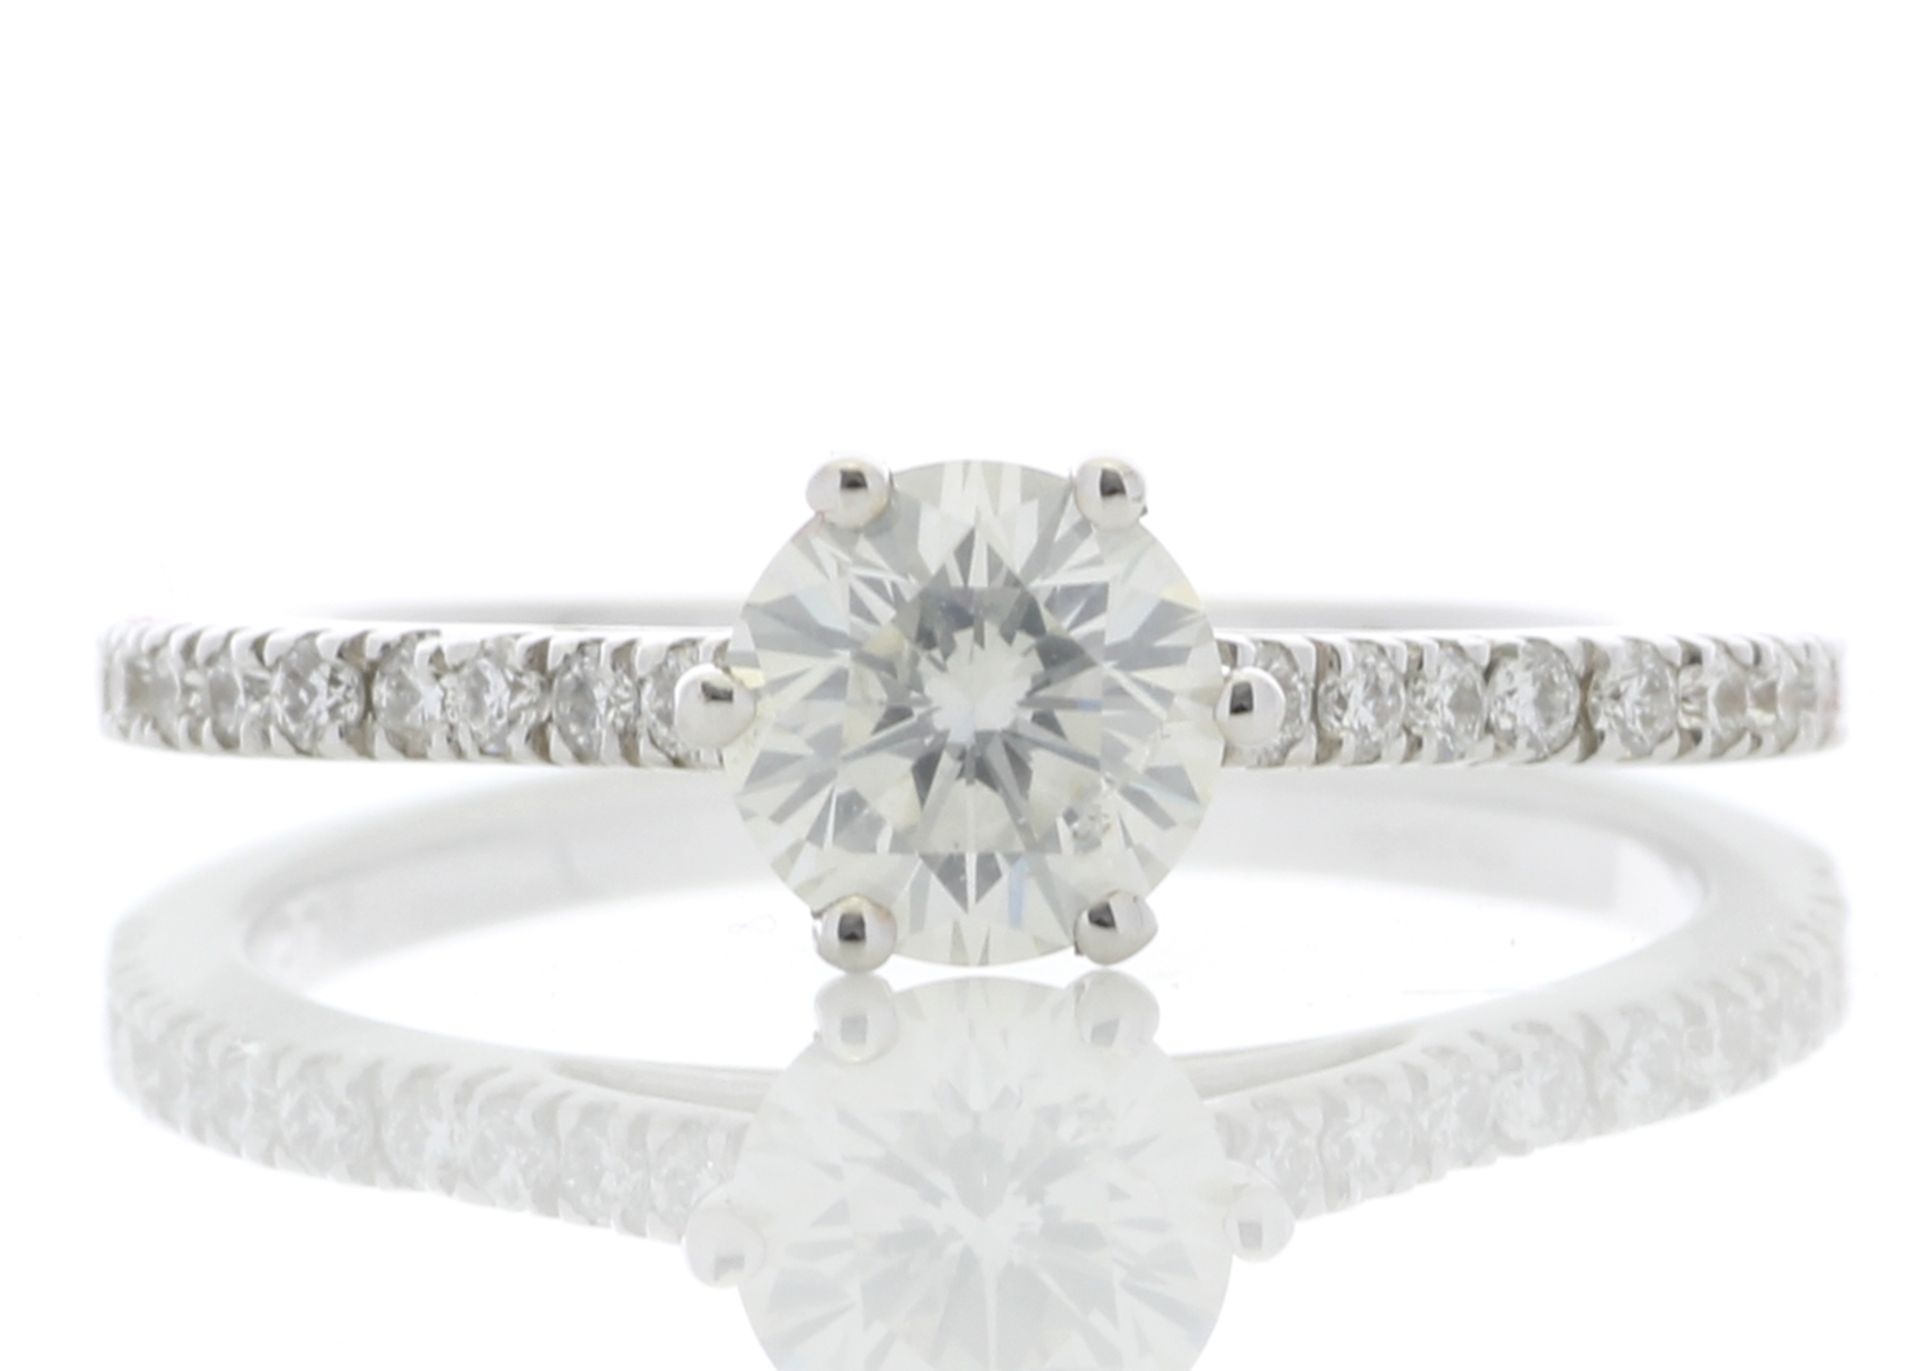 ***£17,450.00*** UNUSED - Certified by GIE 18ct White Gold Solitaire Diamond ring With Stone Set